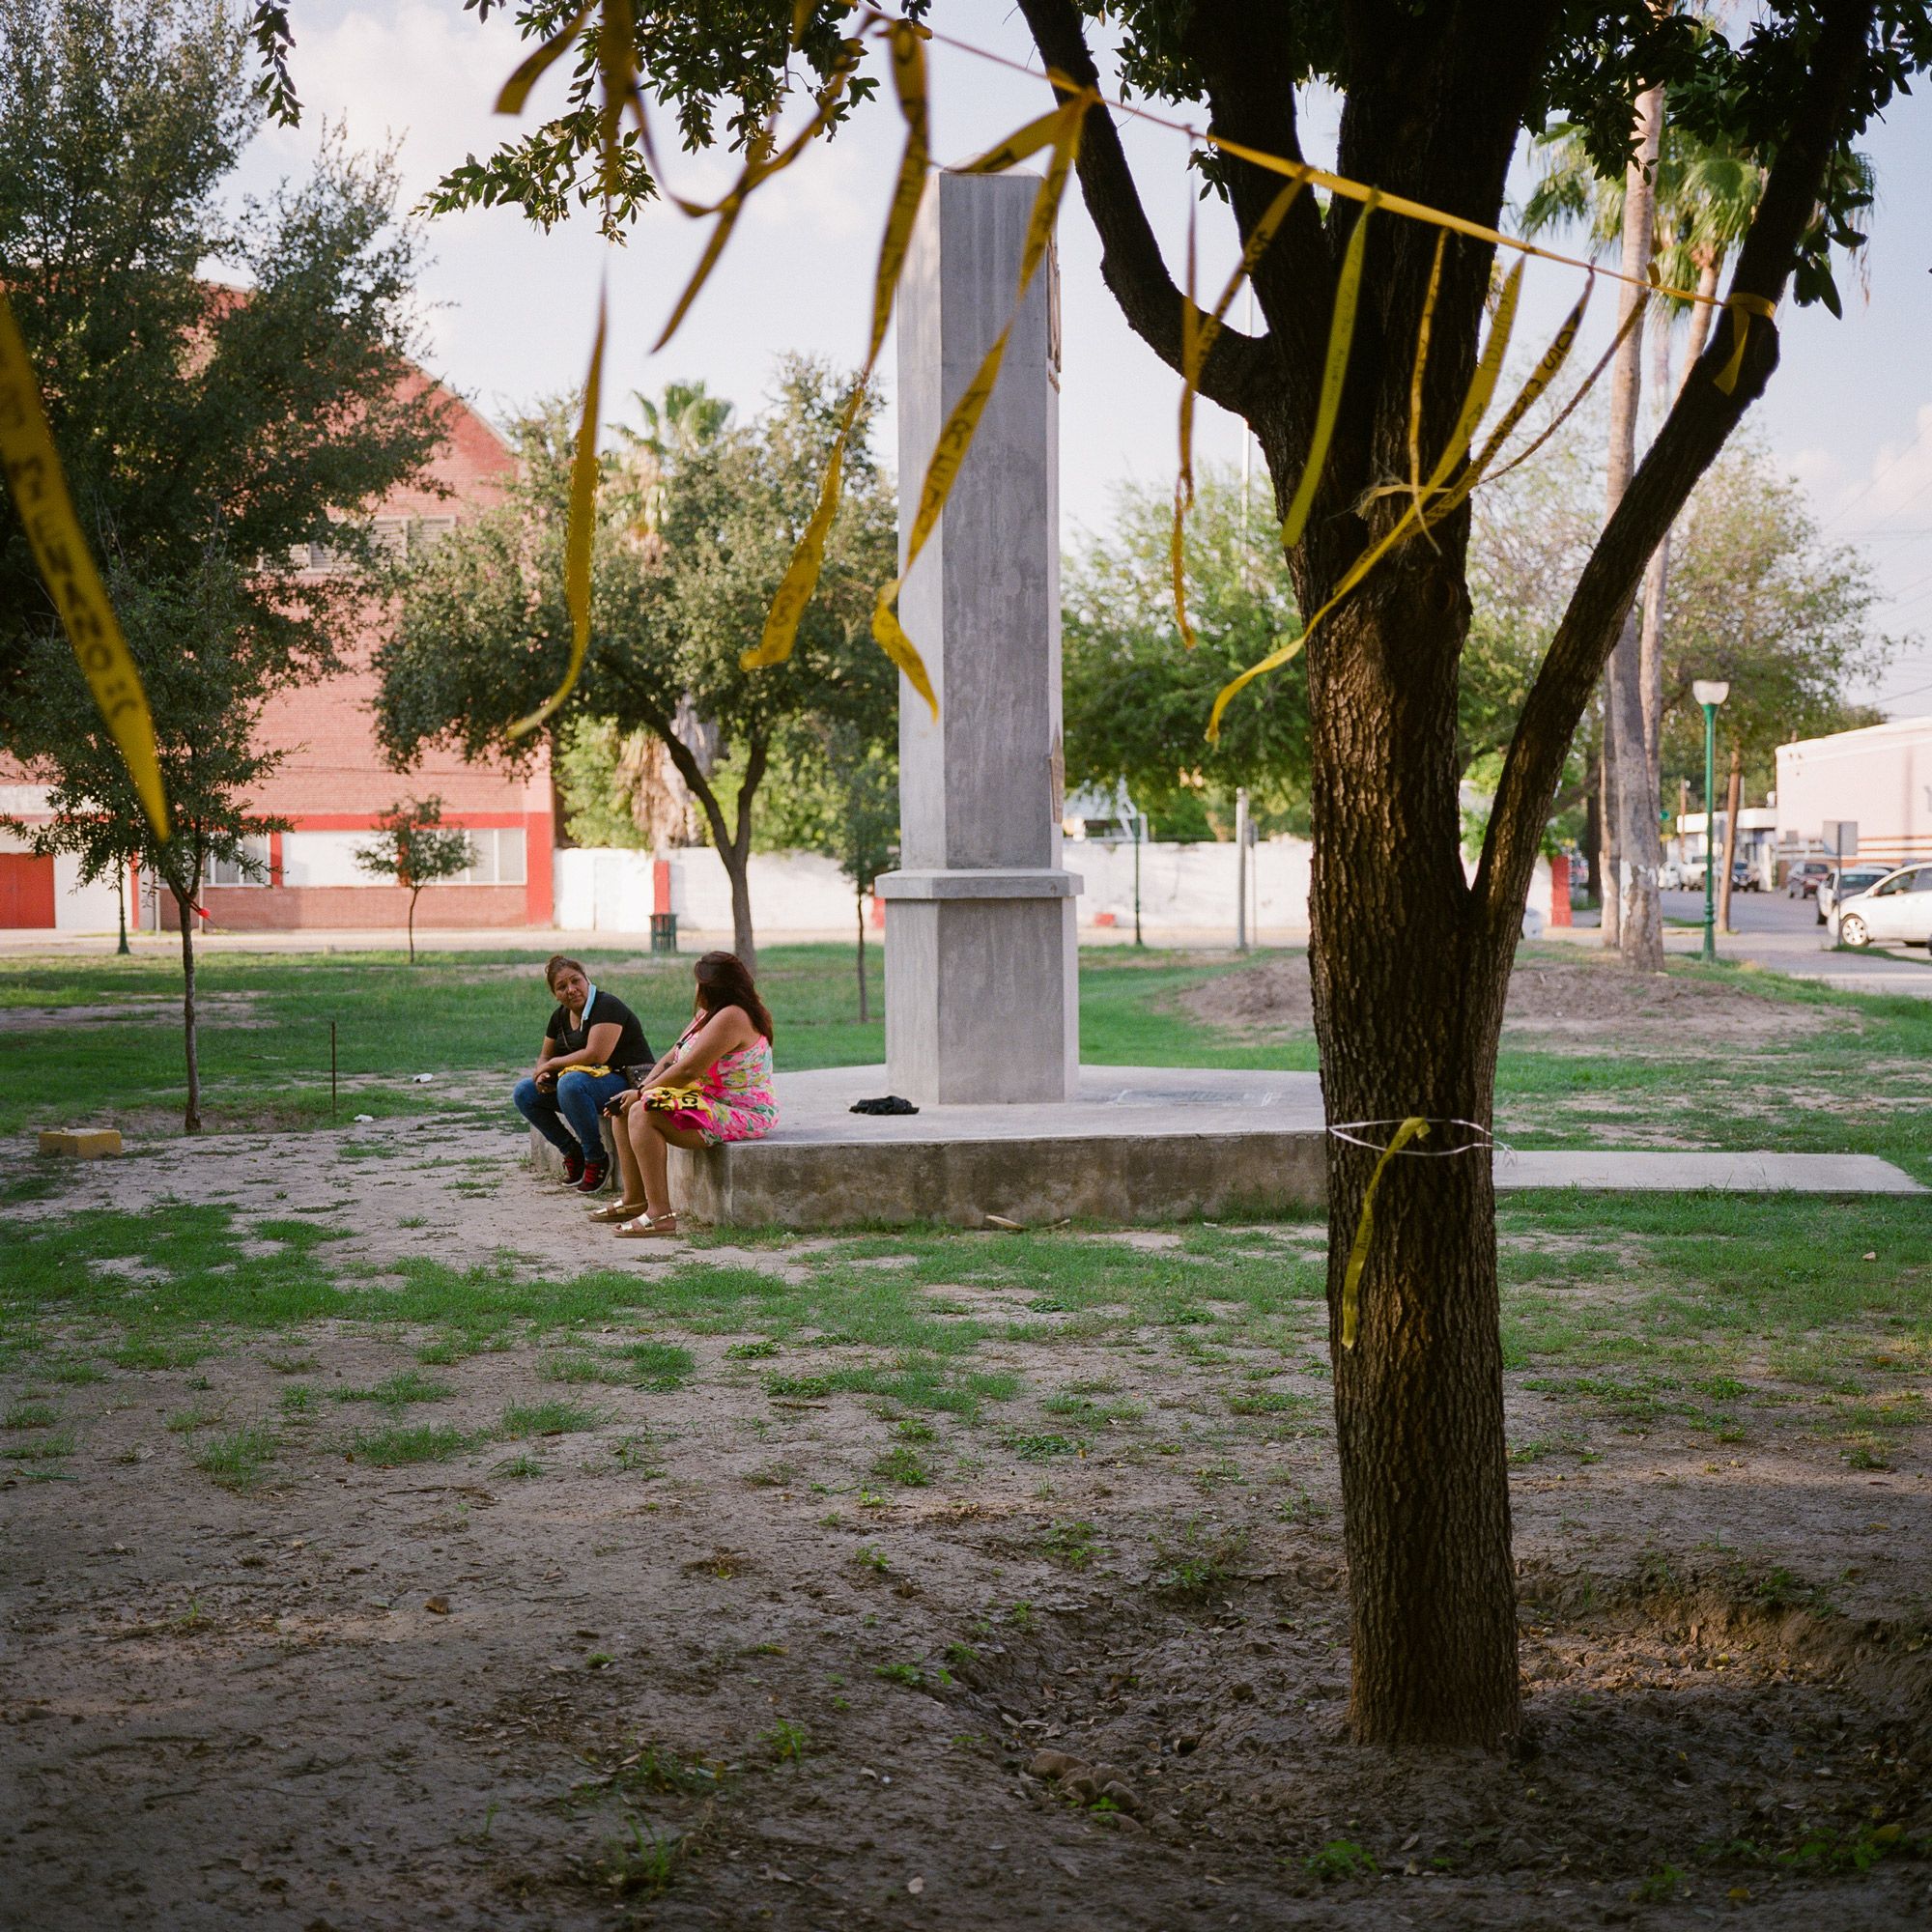 A memorial for those kidnapped is seen in Plaza Palabra. Image by by Christopher Lee. Mexico, 2020.